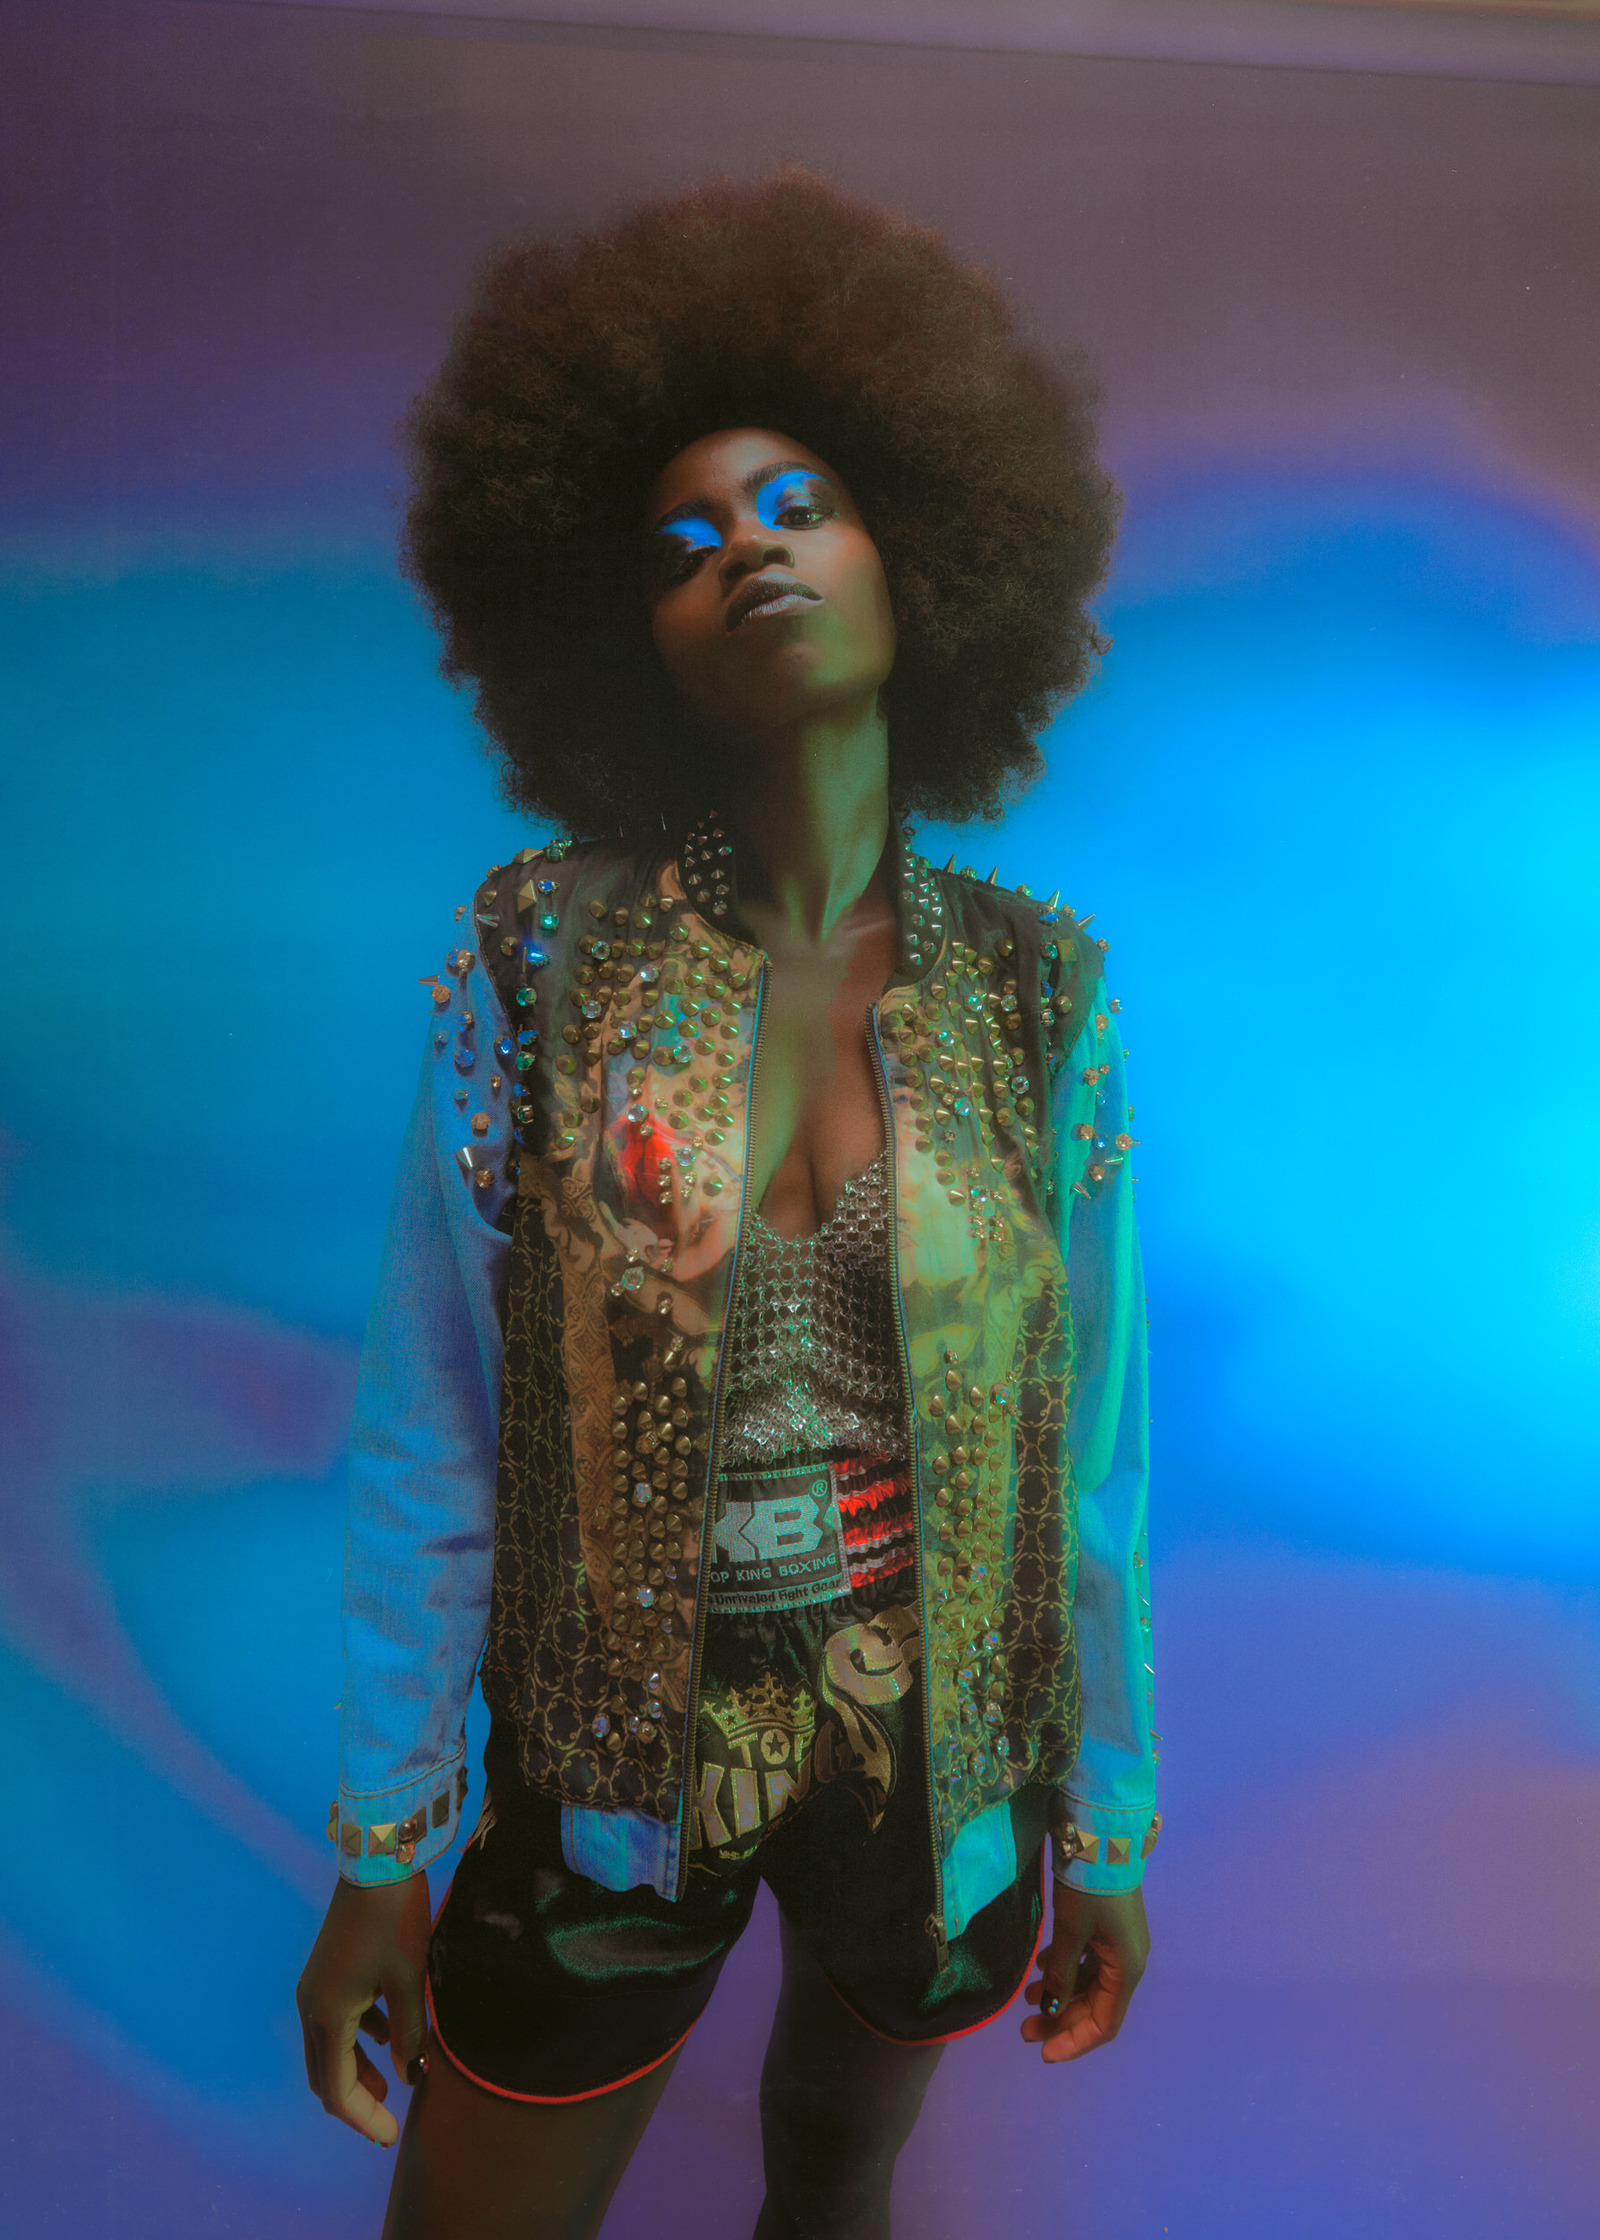 a woman with an afro posing in front of a blue light